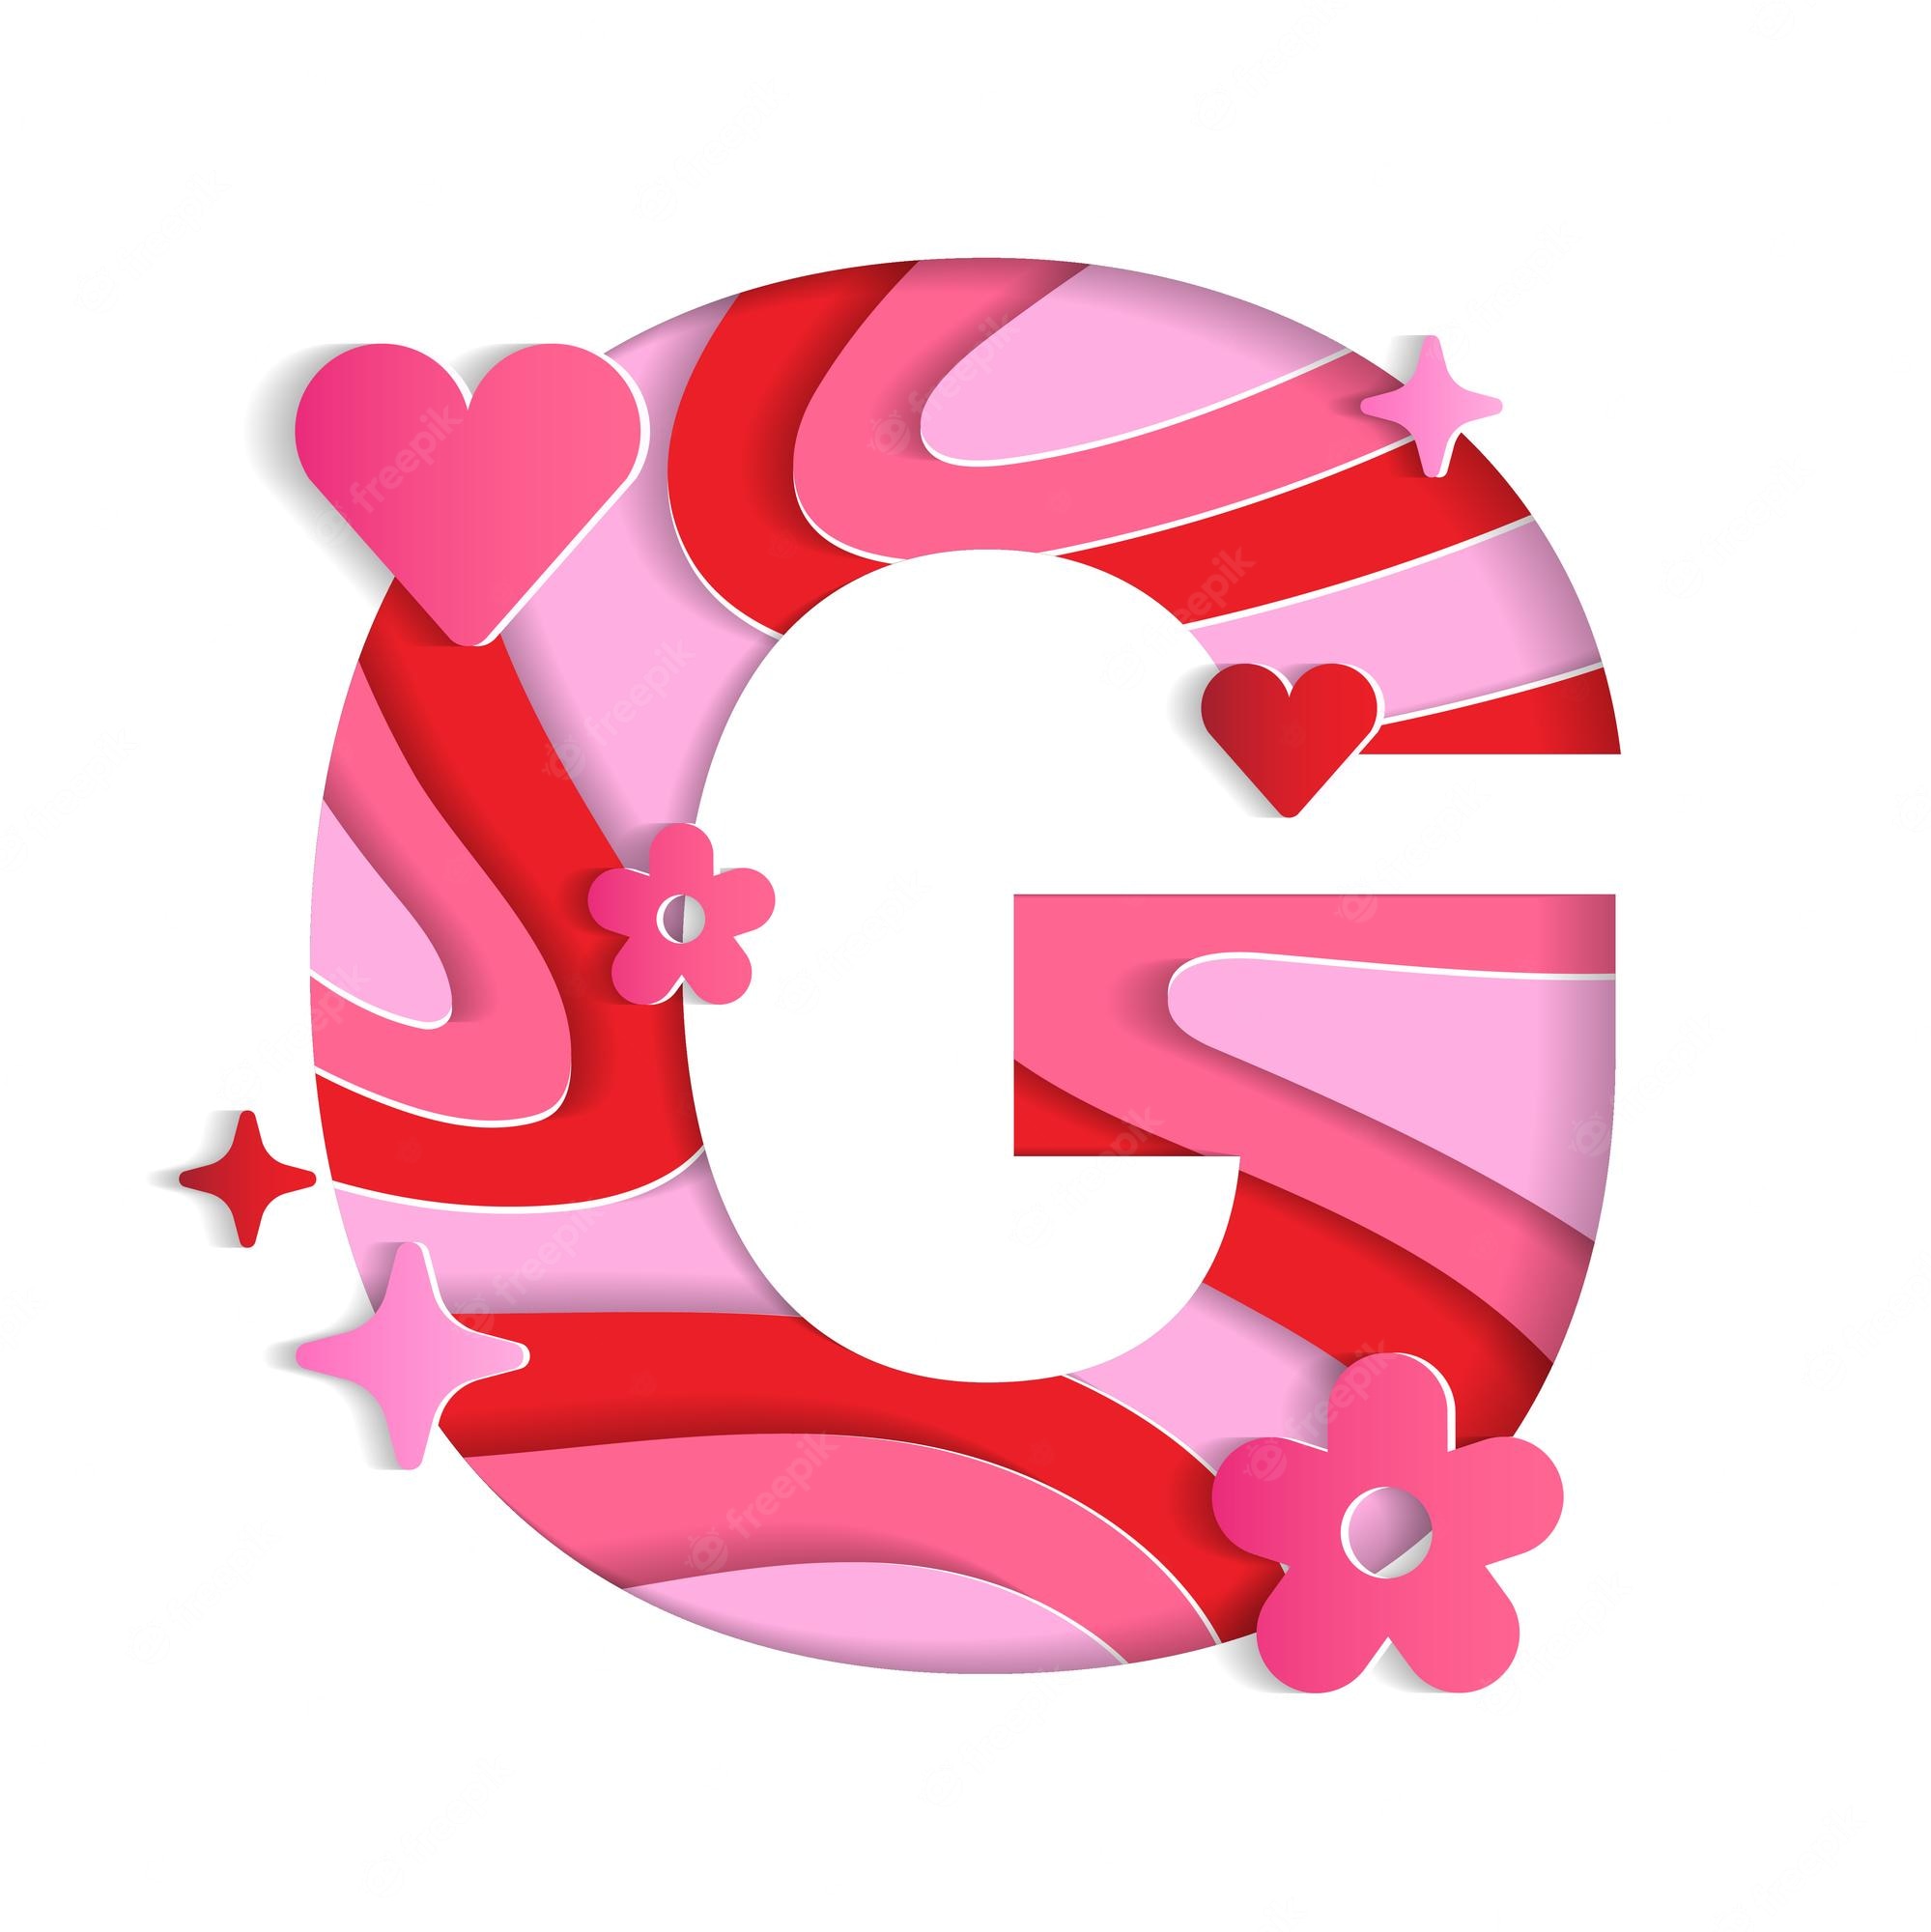 g alphabet valentines day love character font letter paper flower heart 3d layer paper cutout card 307151 945